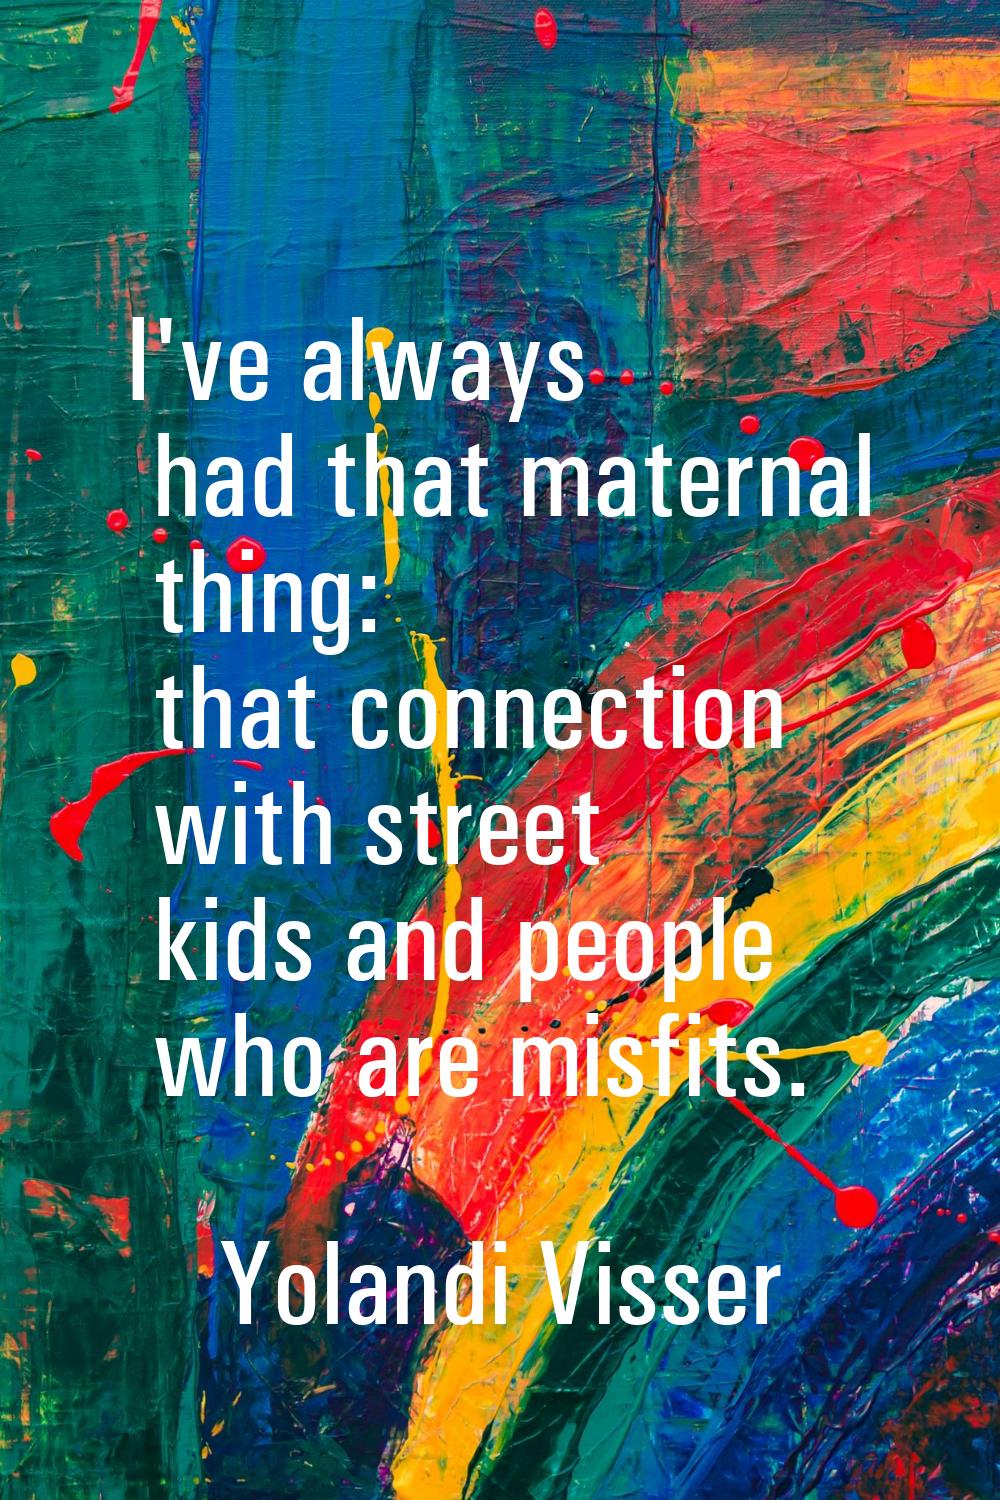 I've always had that maternal thing: that connection with street kids and people who are misfits.